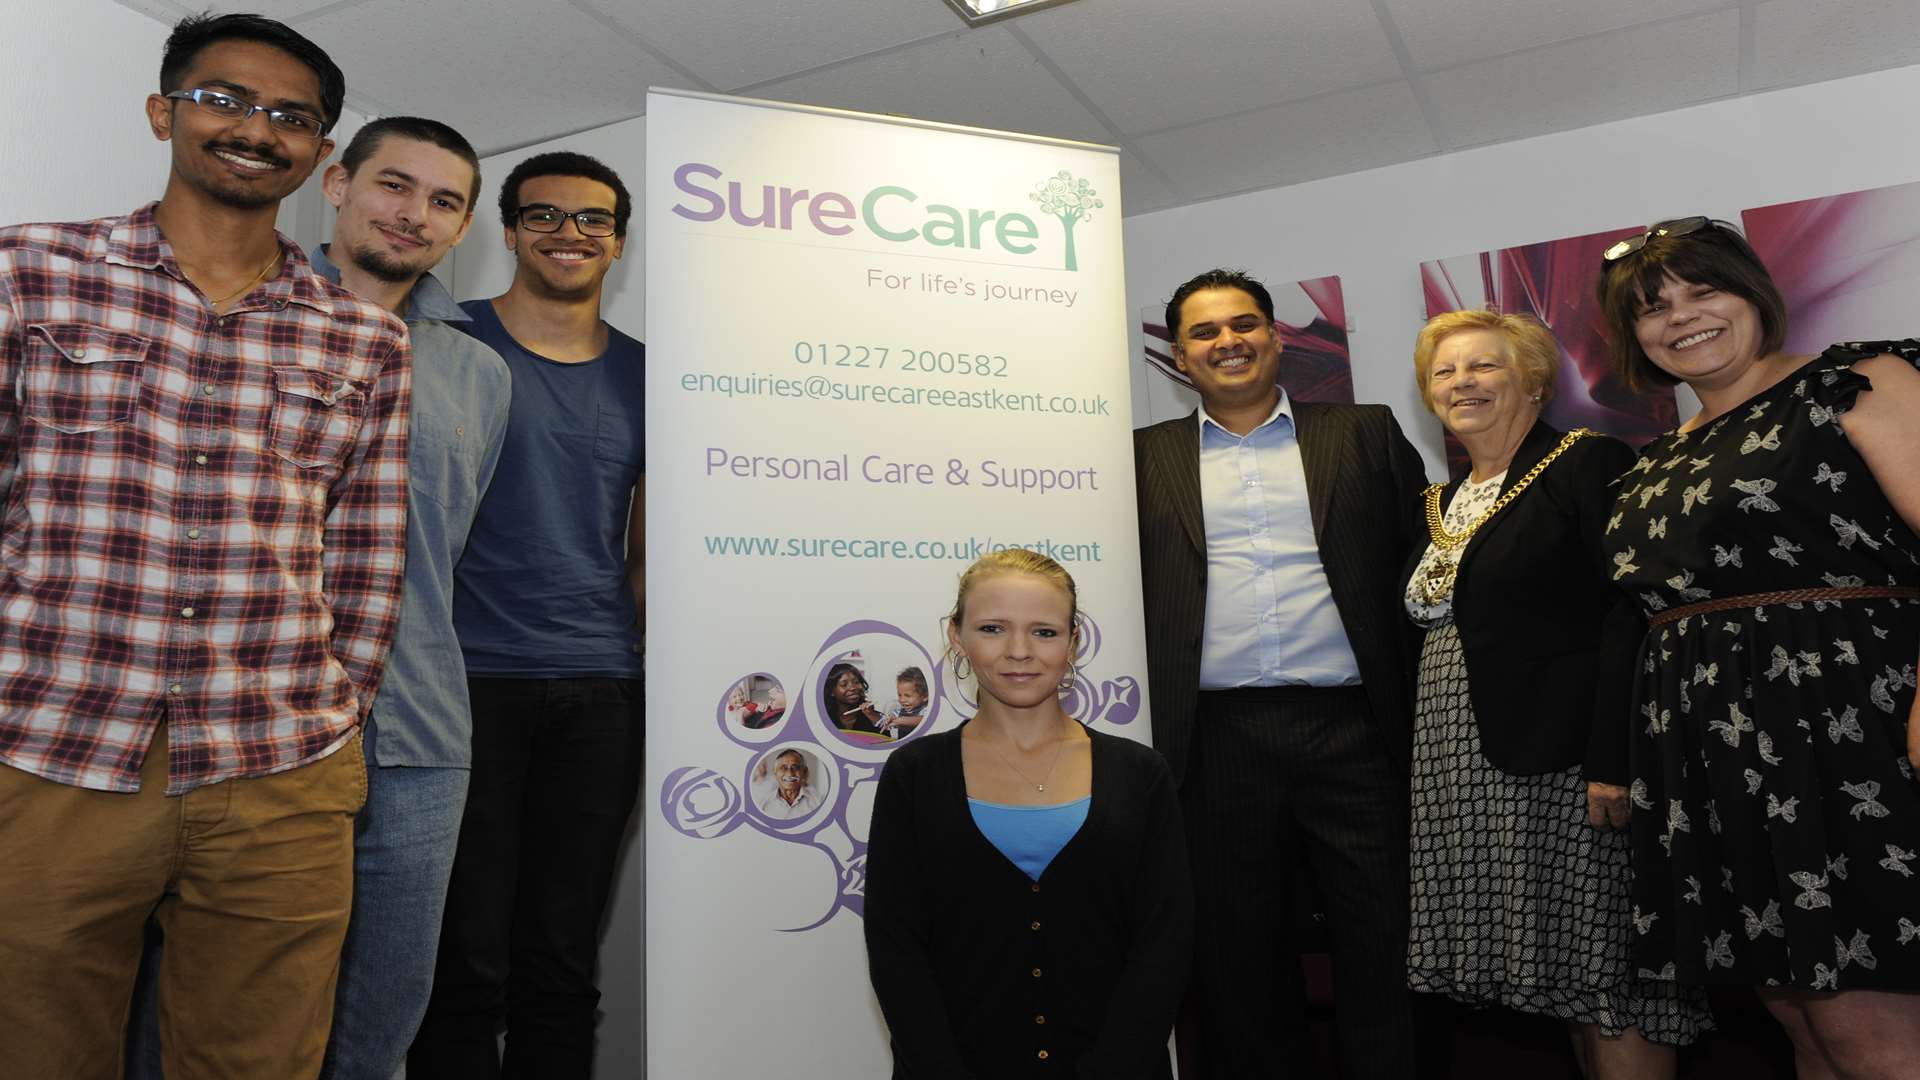 SureCare was one of the businesses launched at University of Kent's Enterprise Hub last year